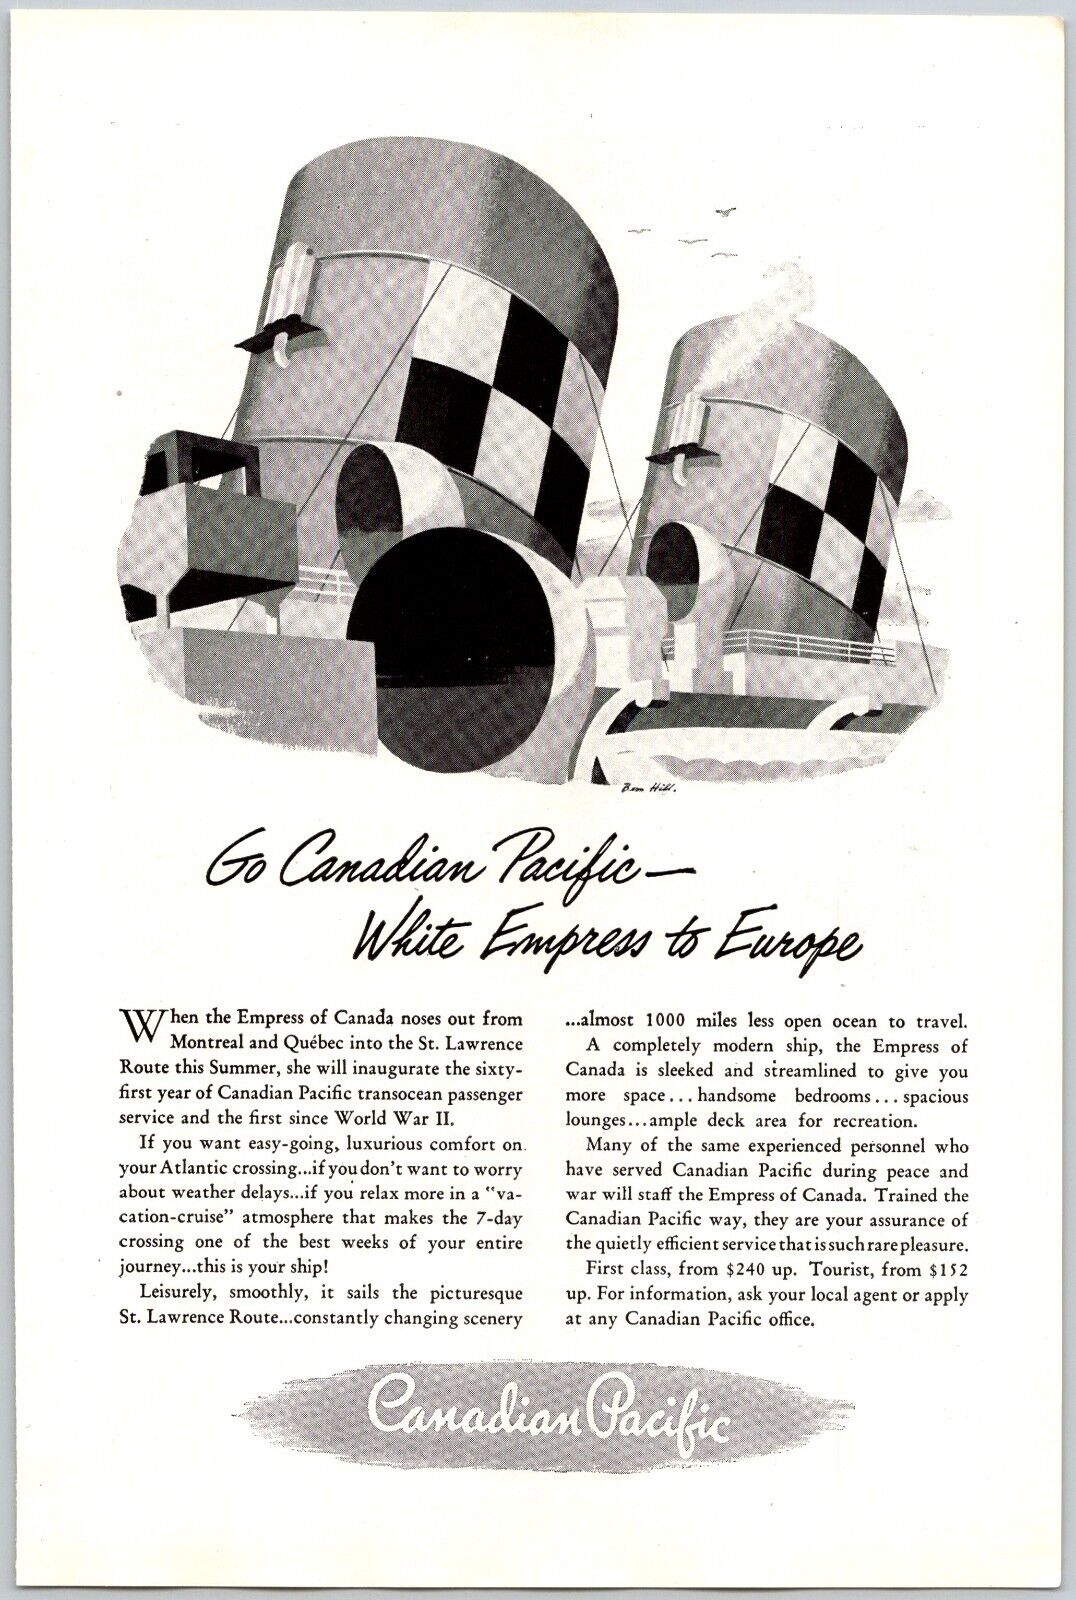 PRINT AD 1947 Canadian Pacific White Empress of Canada to Europe 6.75 x 10